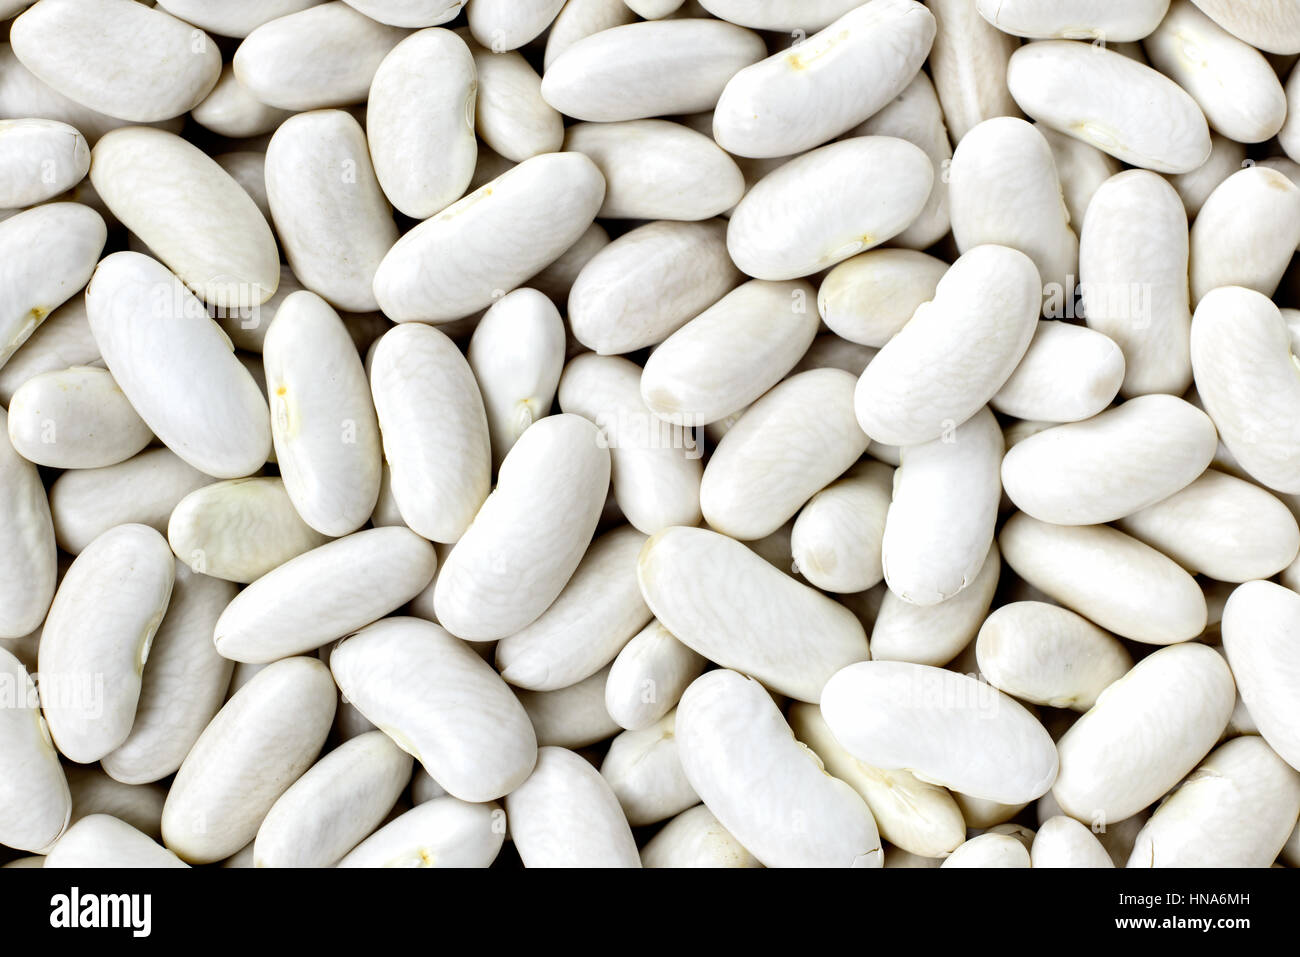 Navy, haricot, white pea, white kidney or Cannellini beans texture background or pattern. Raw legume food. Stock Photo